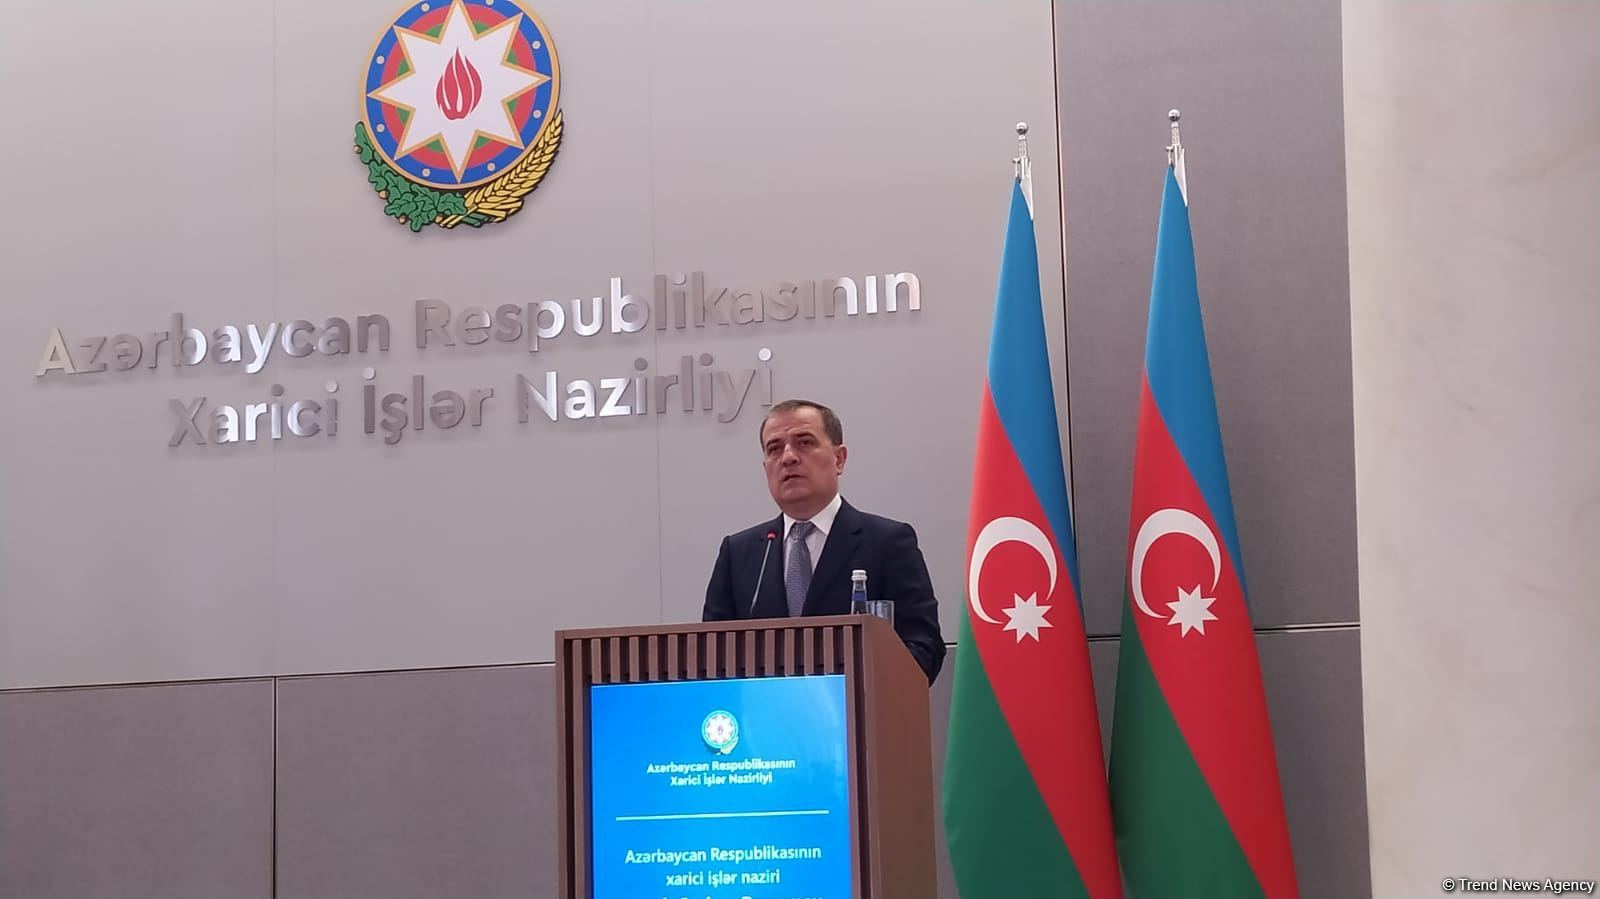 Normalization of relations between Azerbaijan and Armenia cannot fall victim to format - FM